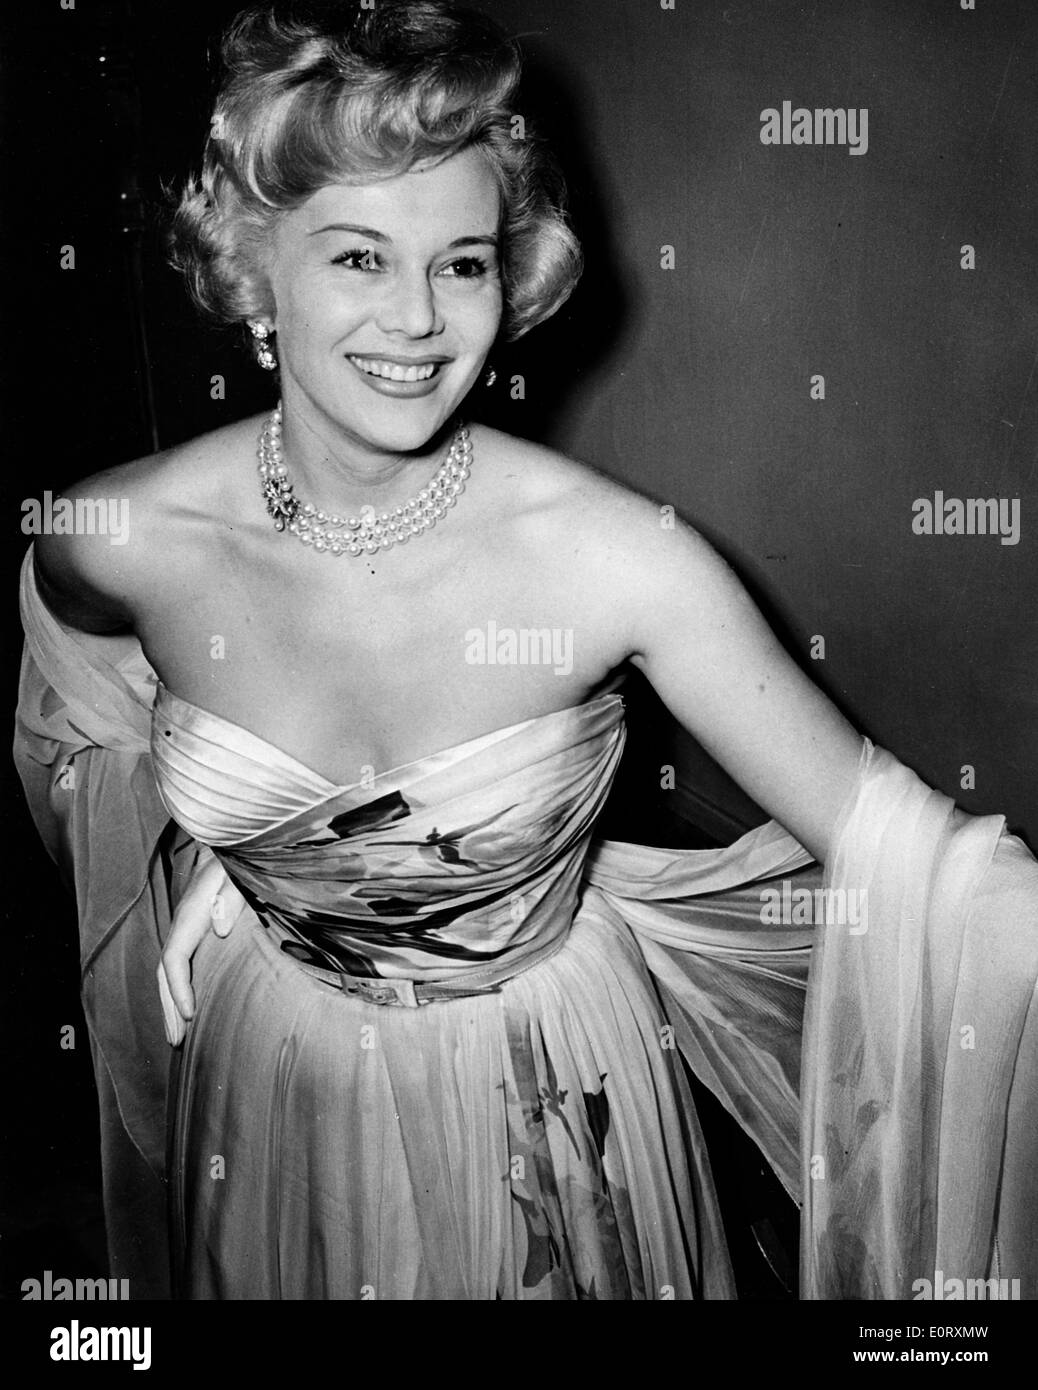 Actress Zsa Zsa Gabor in a gown at a party Stock Photo - Alamy